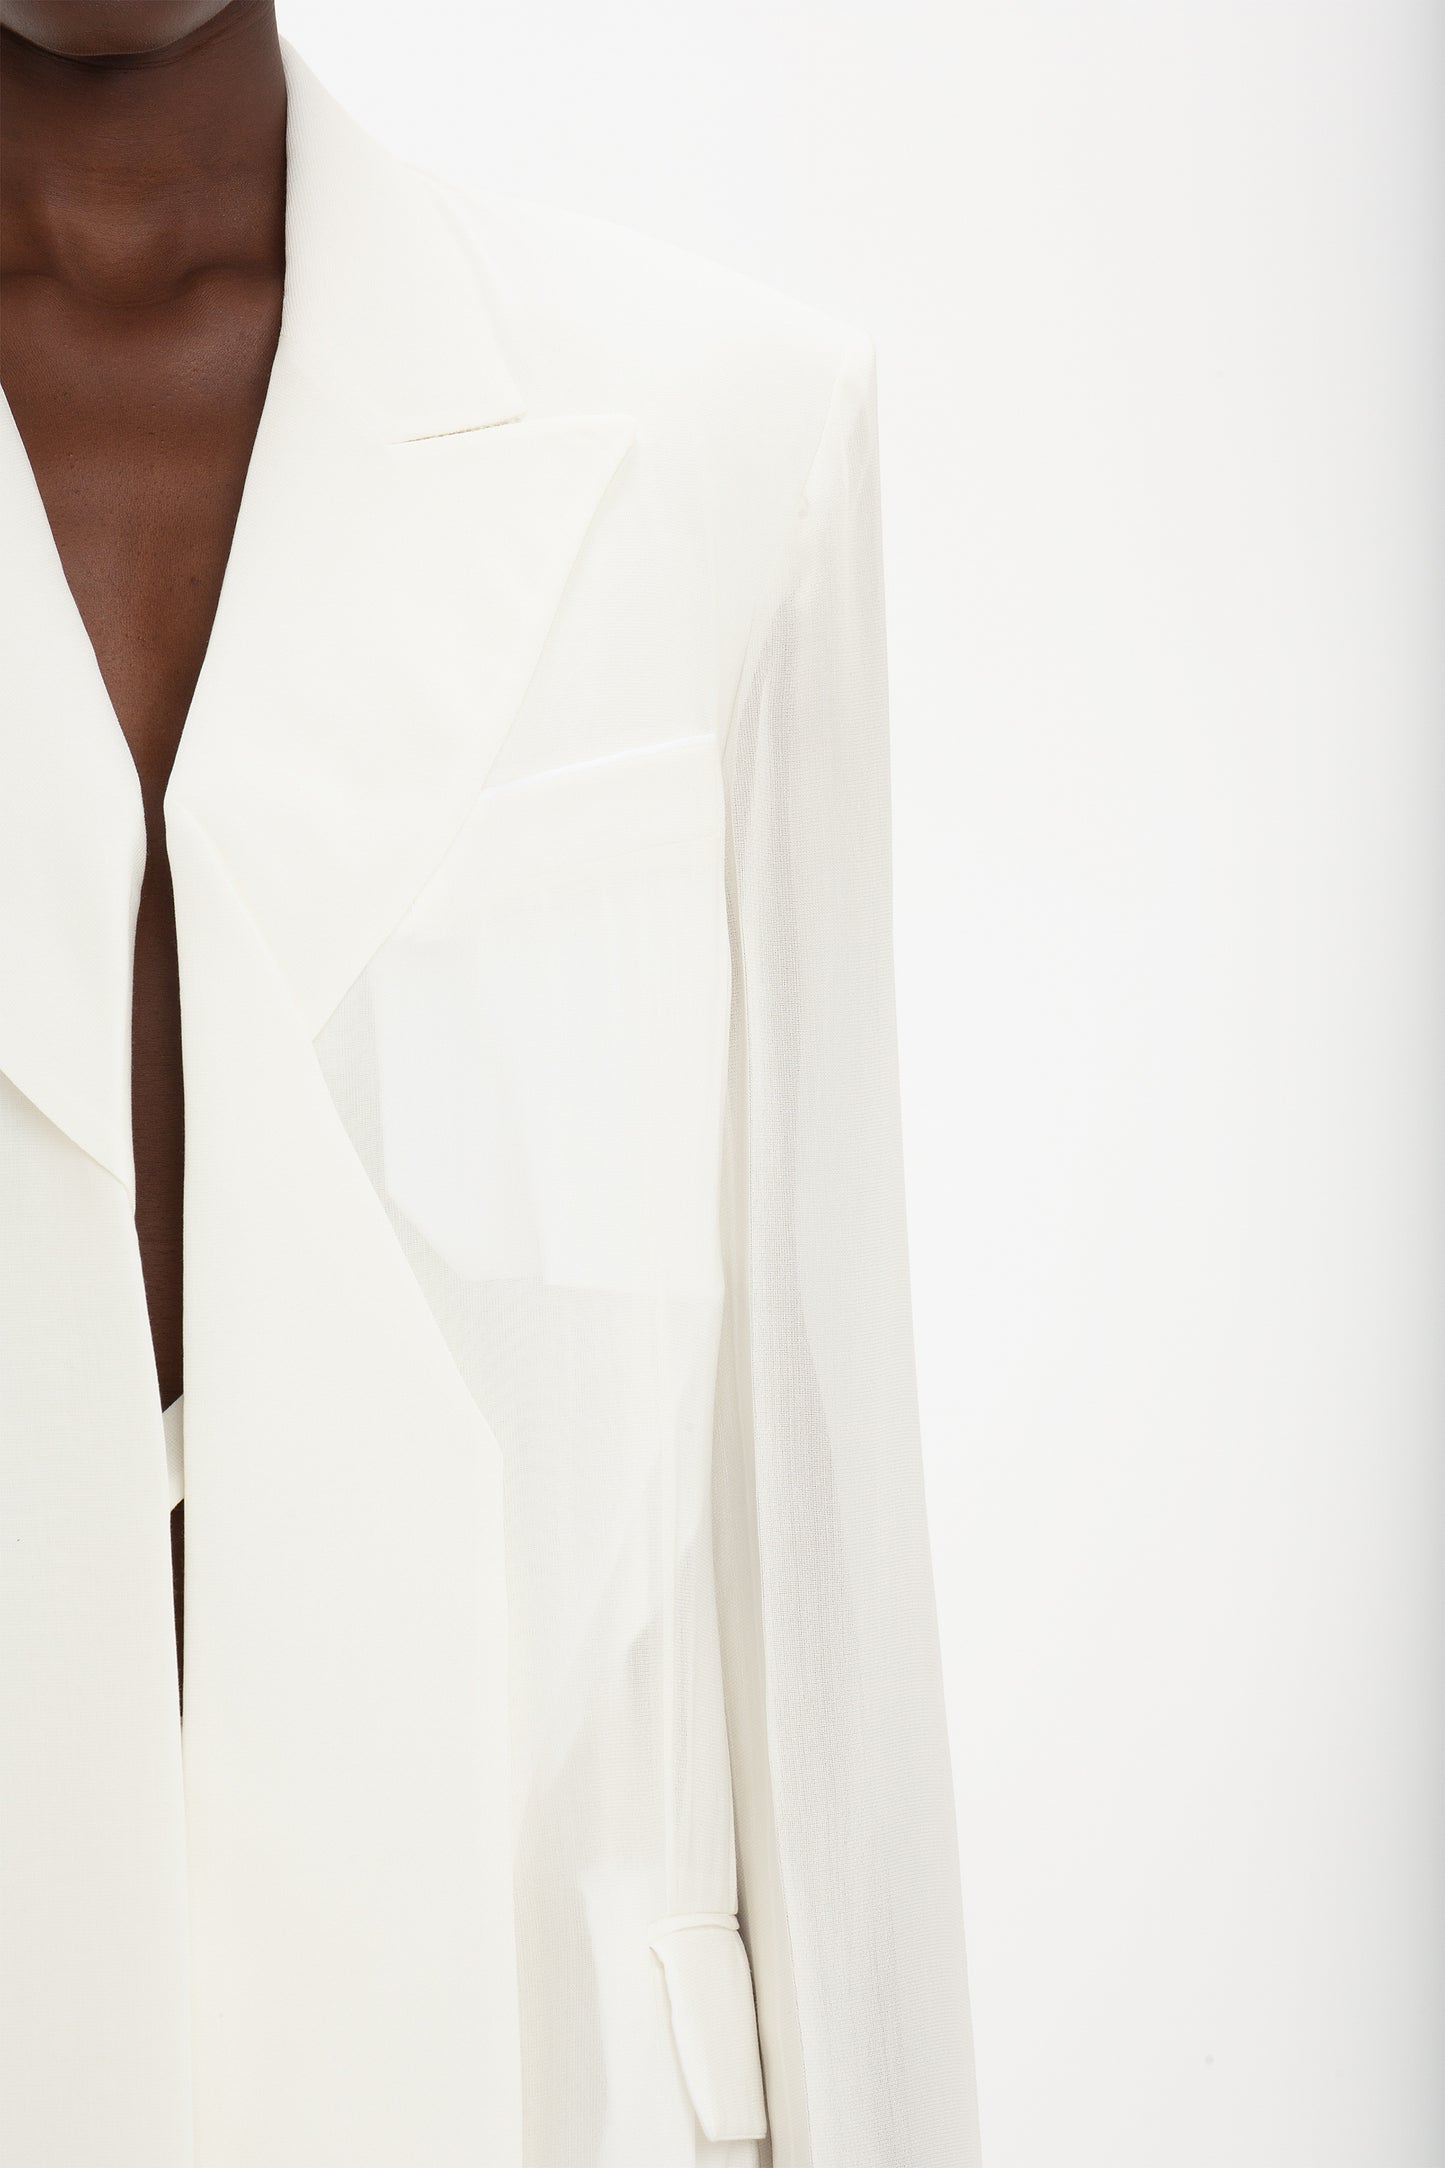 Close-up of a person wearing a white, Fold Detail Tailored Jacket In White by Victoria Beckham made from featherweight wool with a wide lapel against a plain white background. Only part of their face and upper body are visible, giving the ensemble a modern flair.